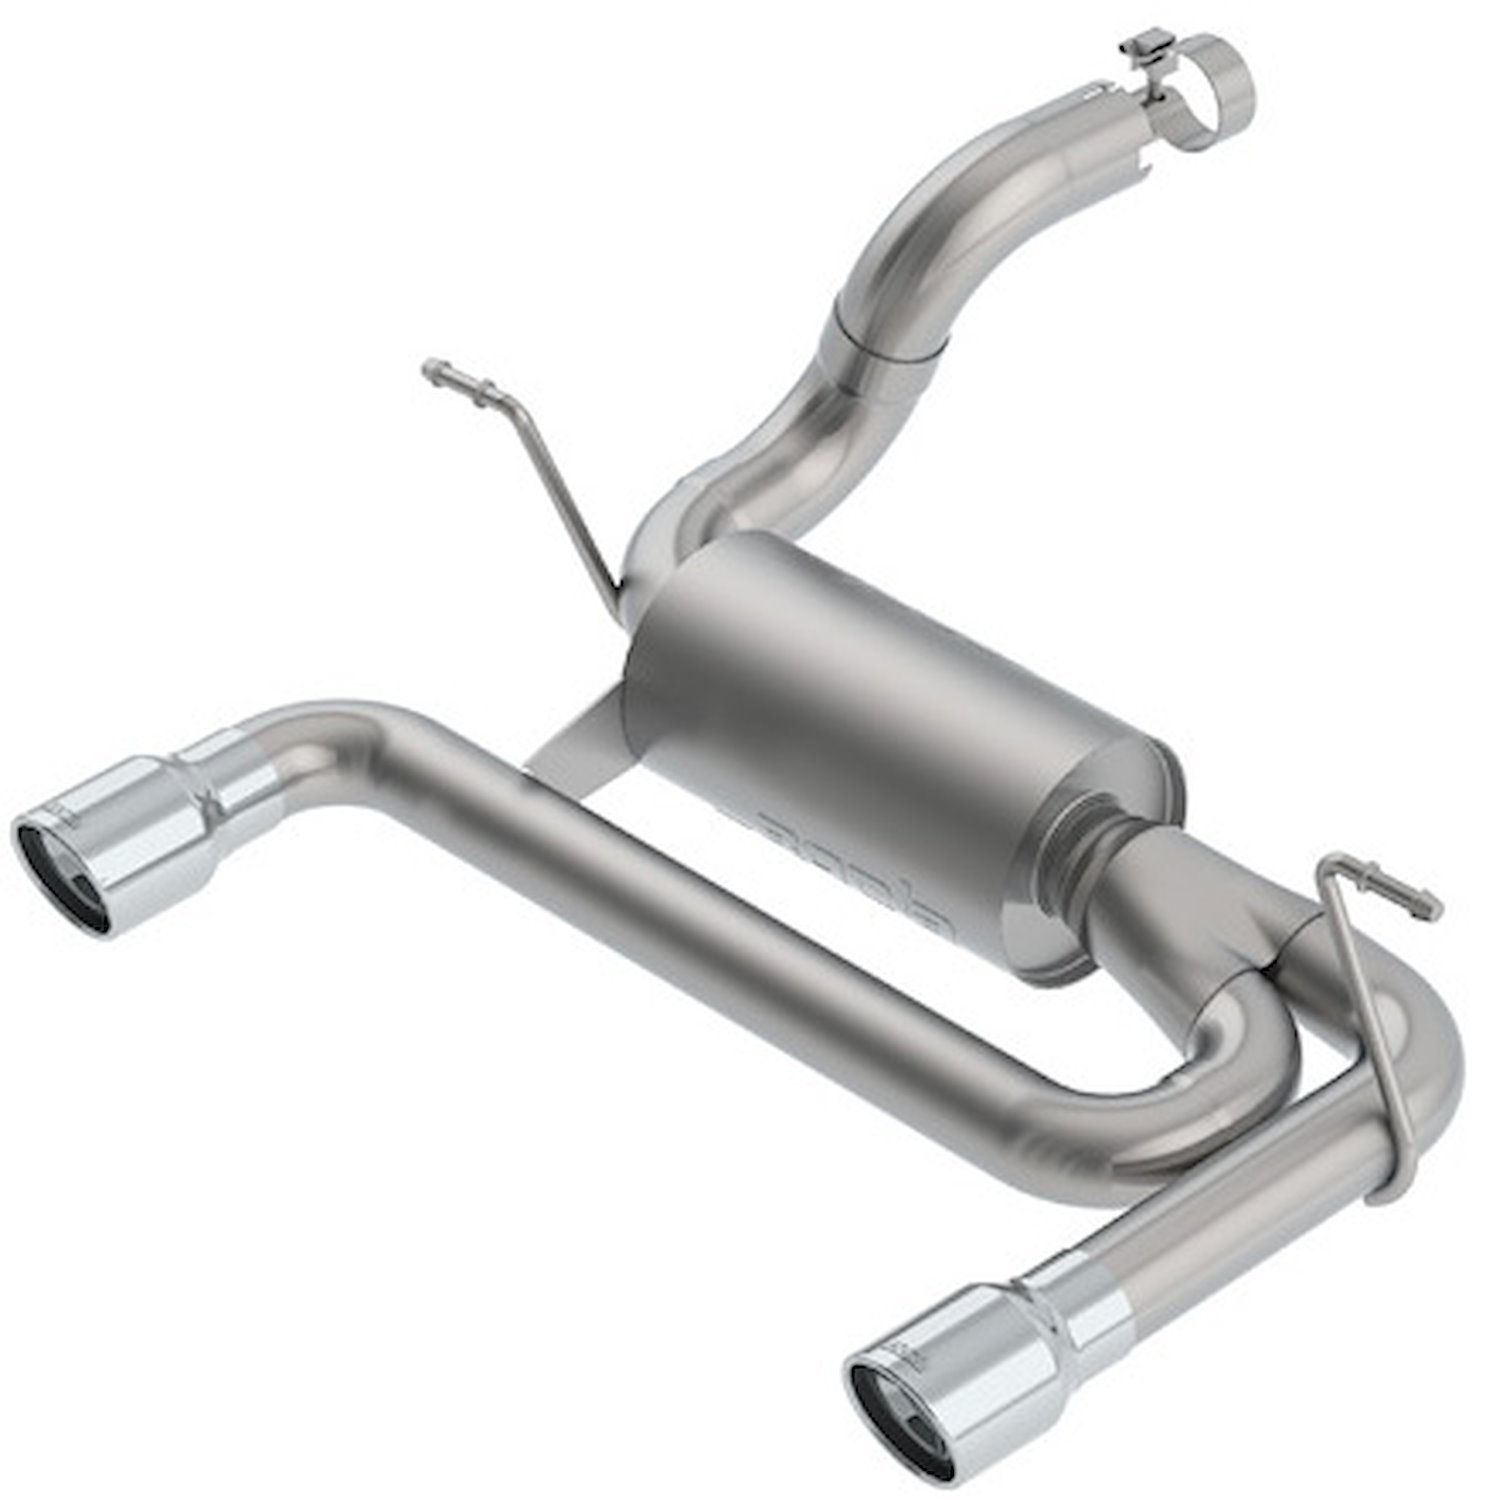 Axle-Back Exhaust System With ATAK Muffler for 2018 Jeep Wrangler JL/JLU 3.6L V6 - Polished Tips